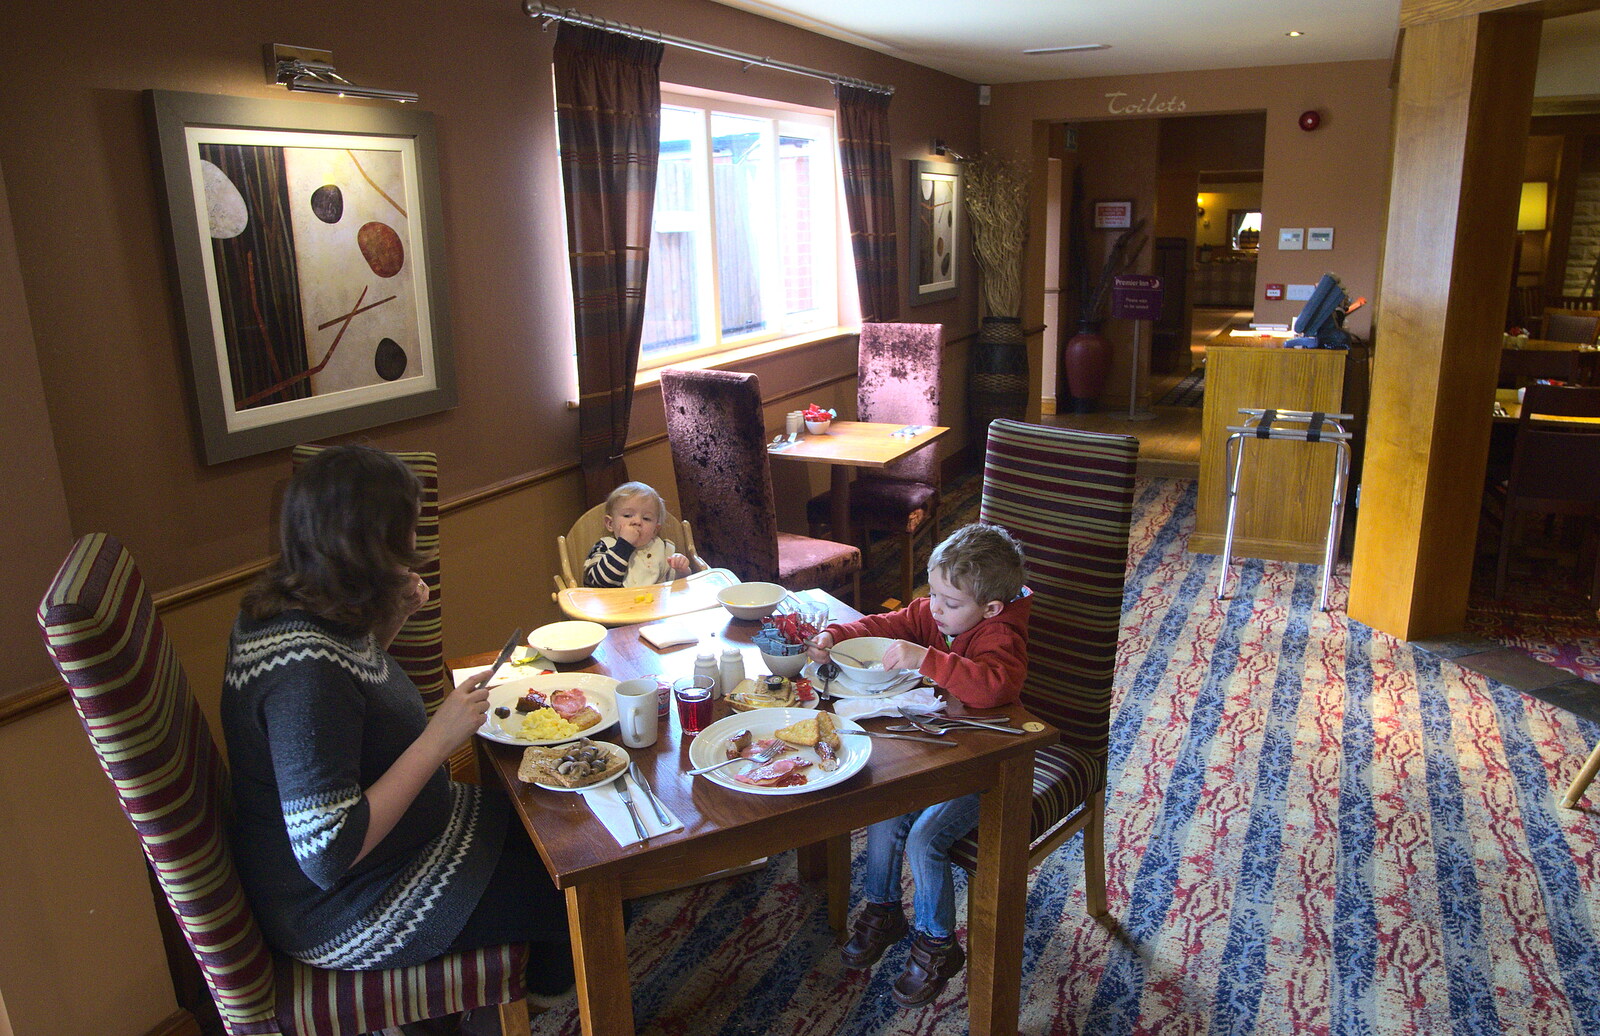 Breakfast in the Premier Inn, Highcliffe from The Ornamental Drive, Rhinefield, New Forest - 20th March 2013